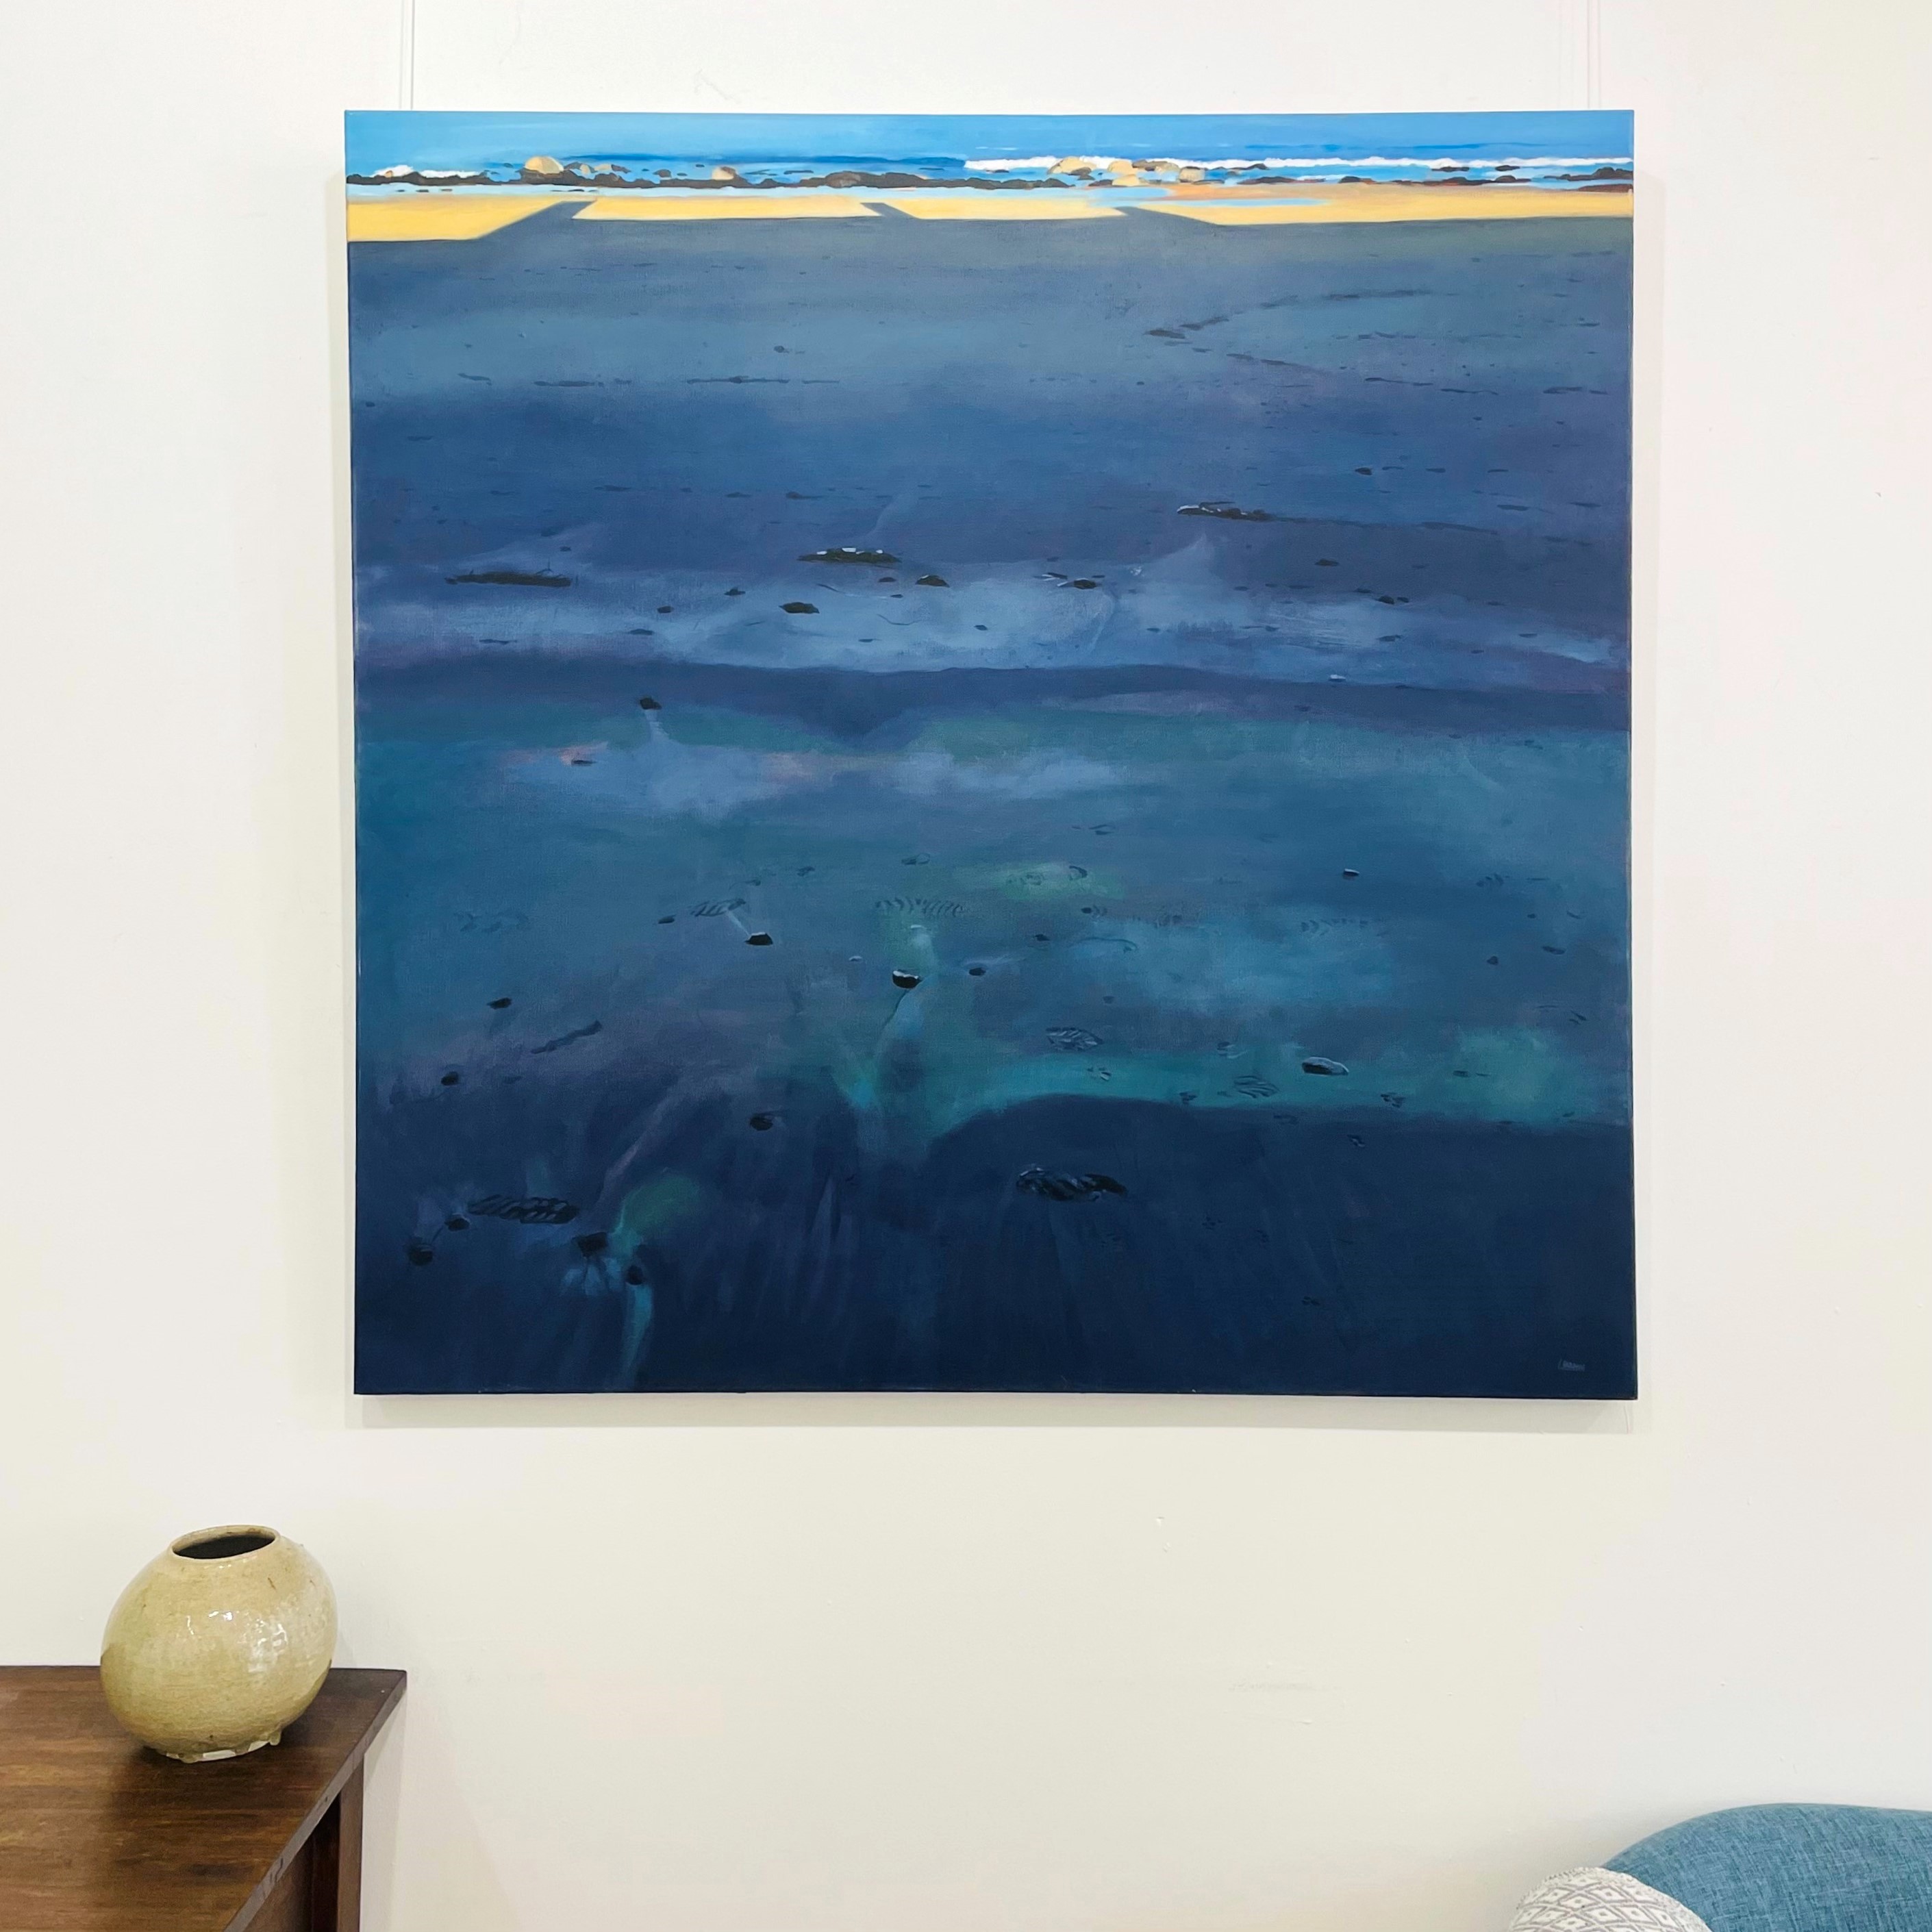 'Beach, Black and Blue' by artist Lesley Banks